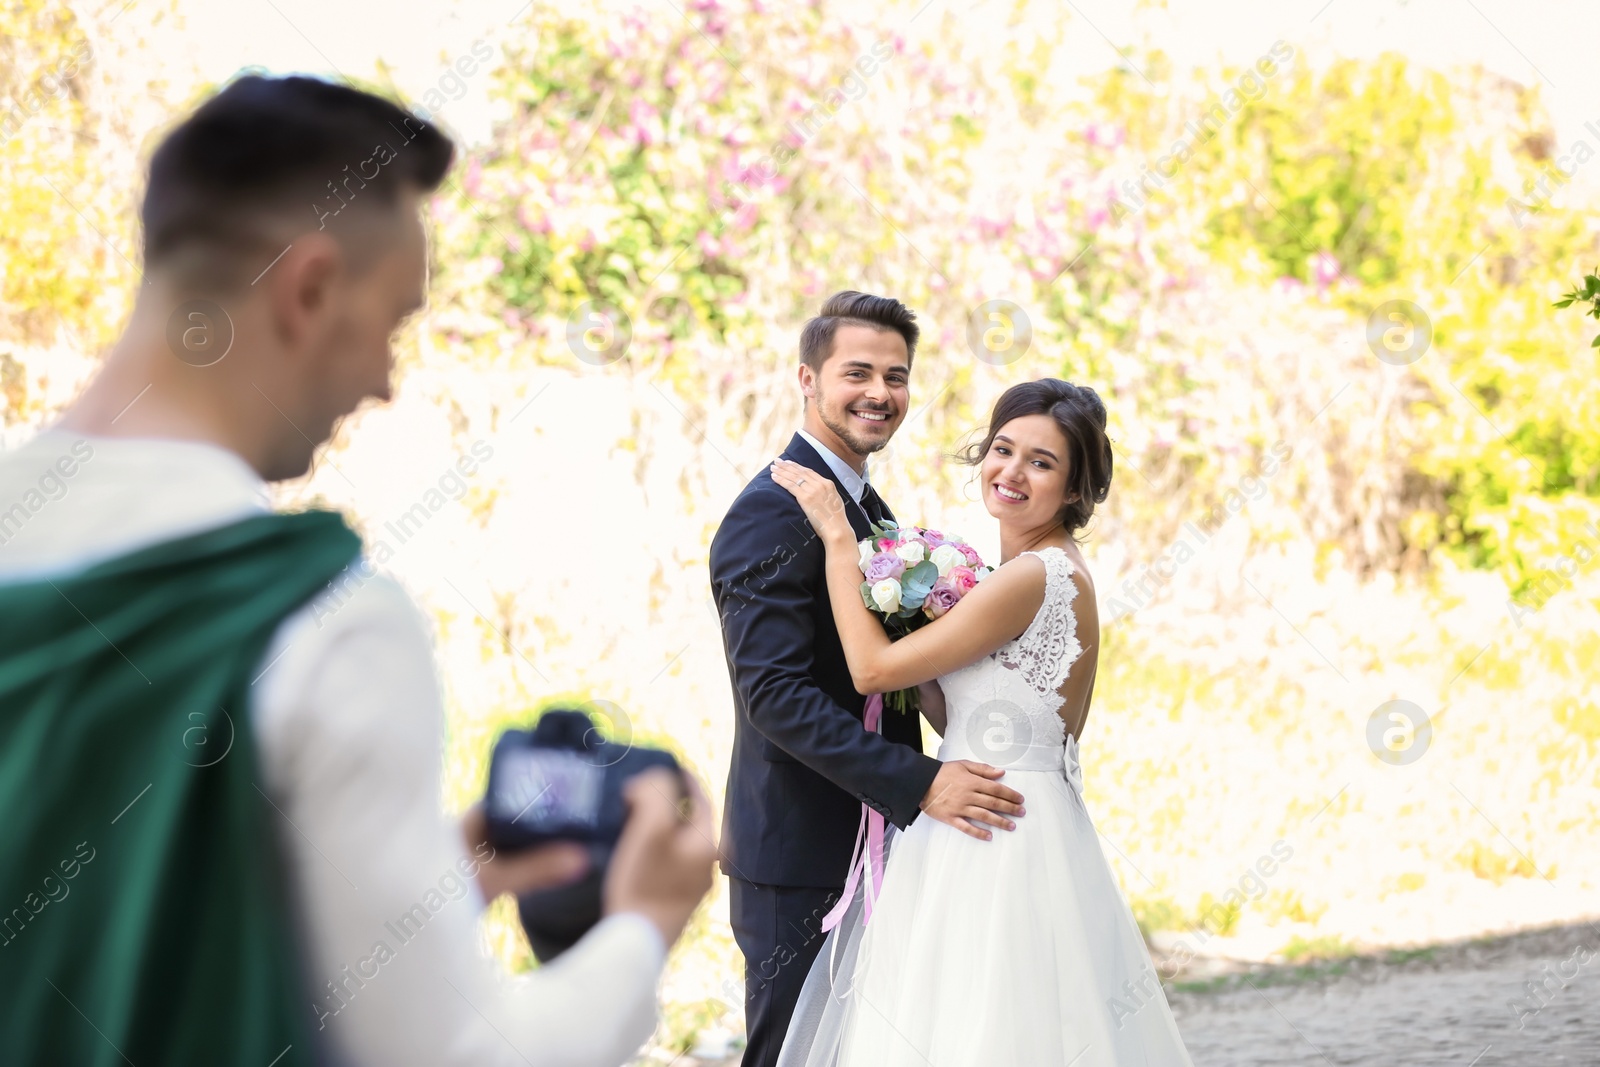 Photo of Wedding couple and professional photographer with camera, outdoors